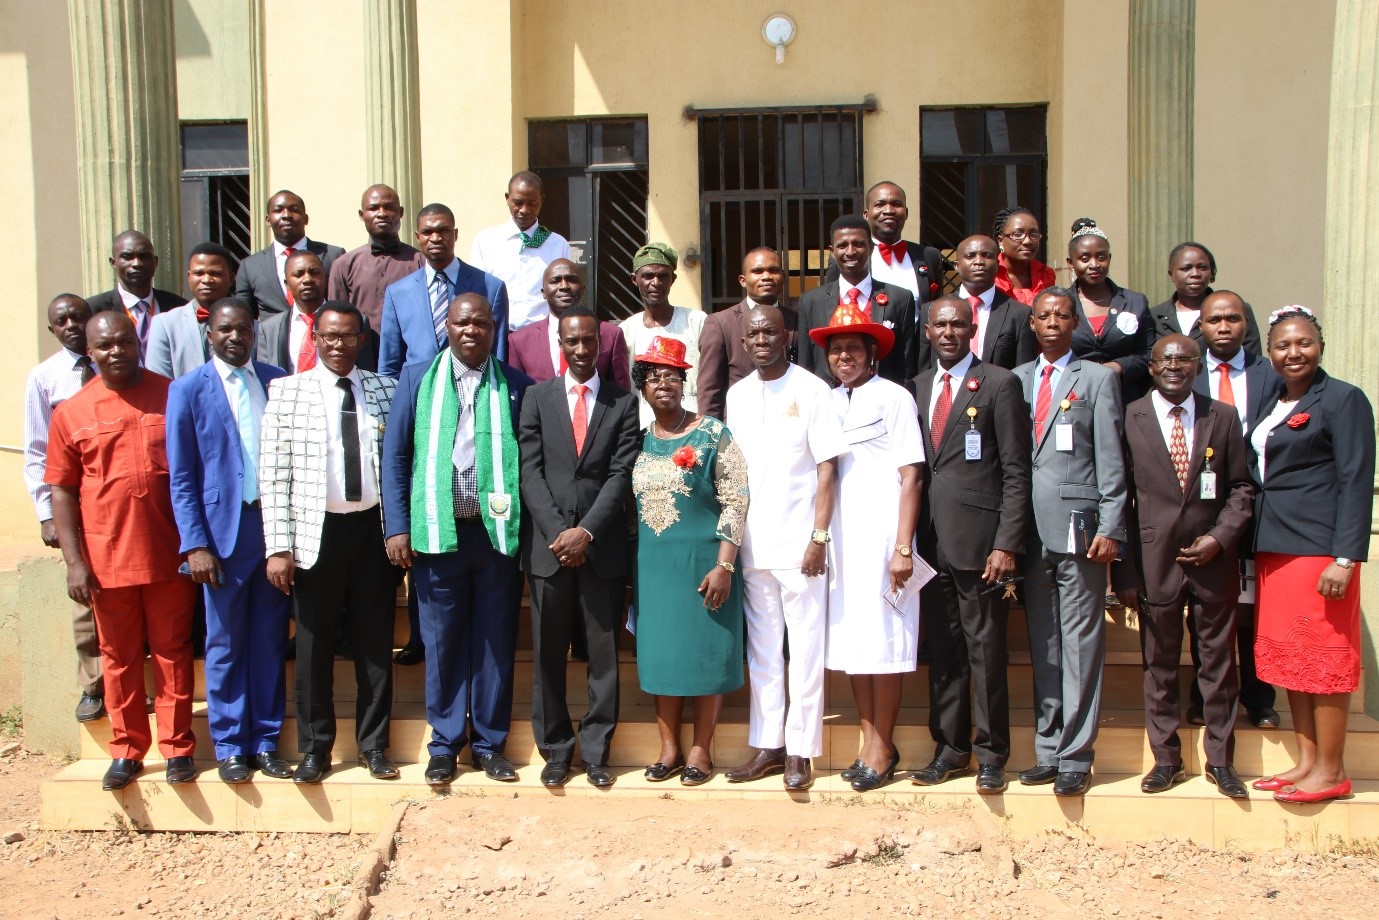 A group photograph of Vice-Chancellor, LMU, LUSS Governing Board, Management and teachers after the 2017 Christmas Carol